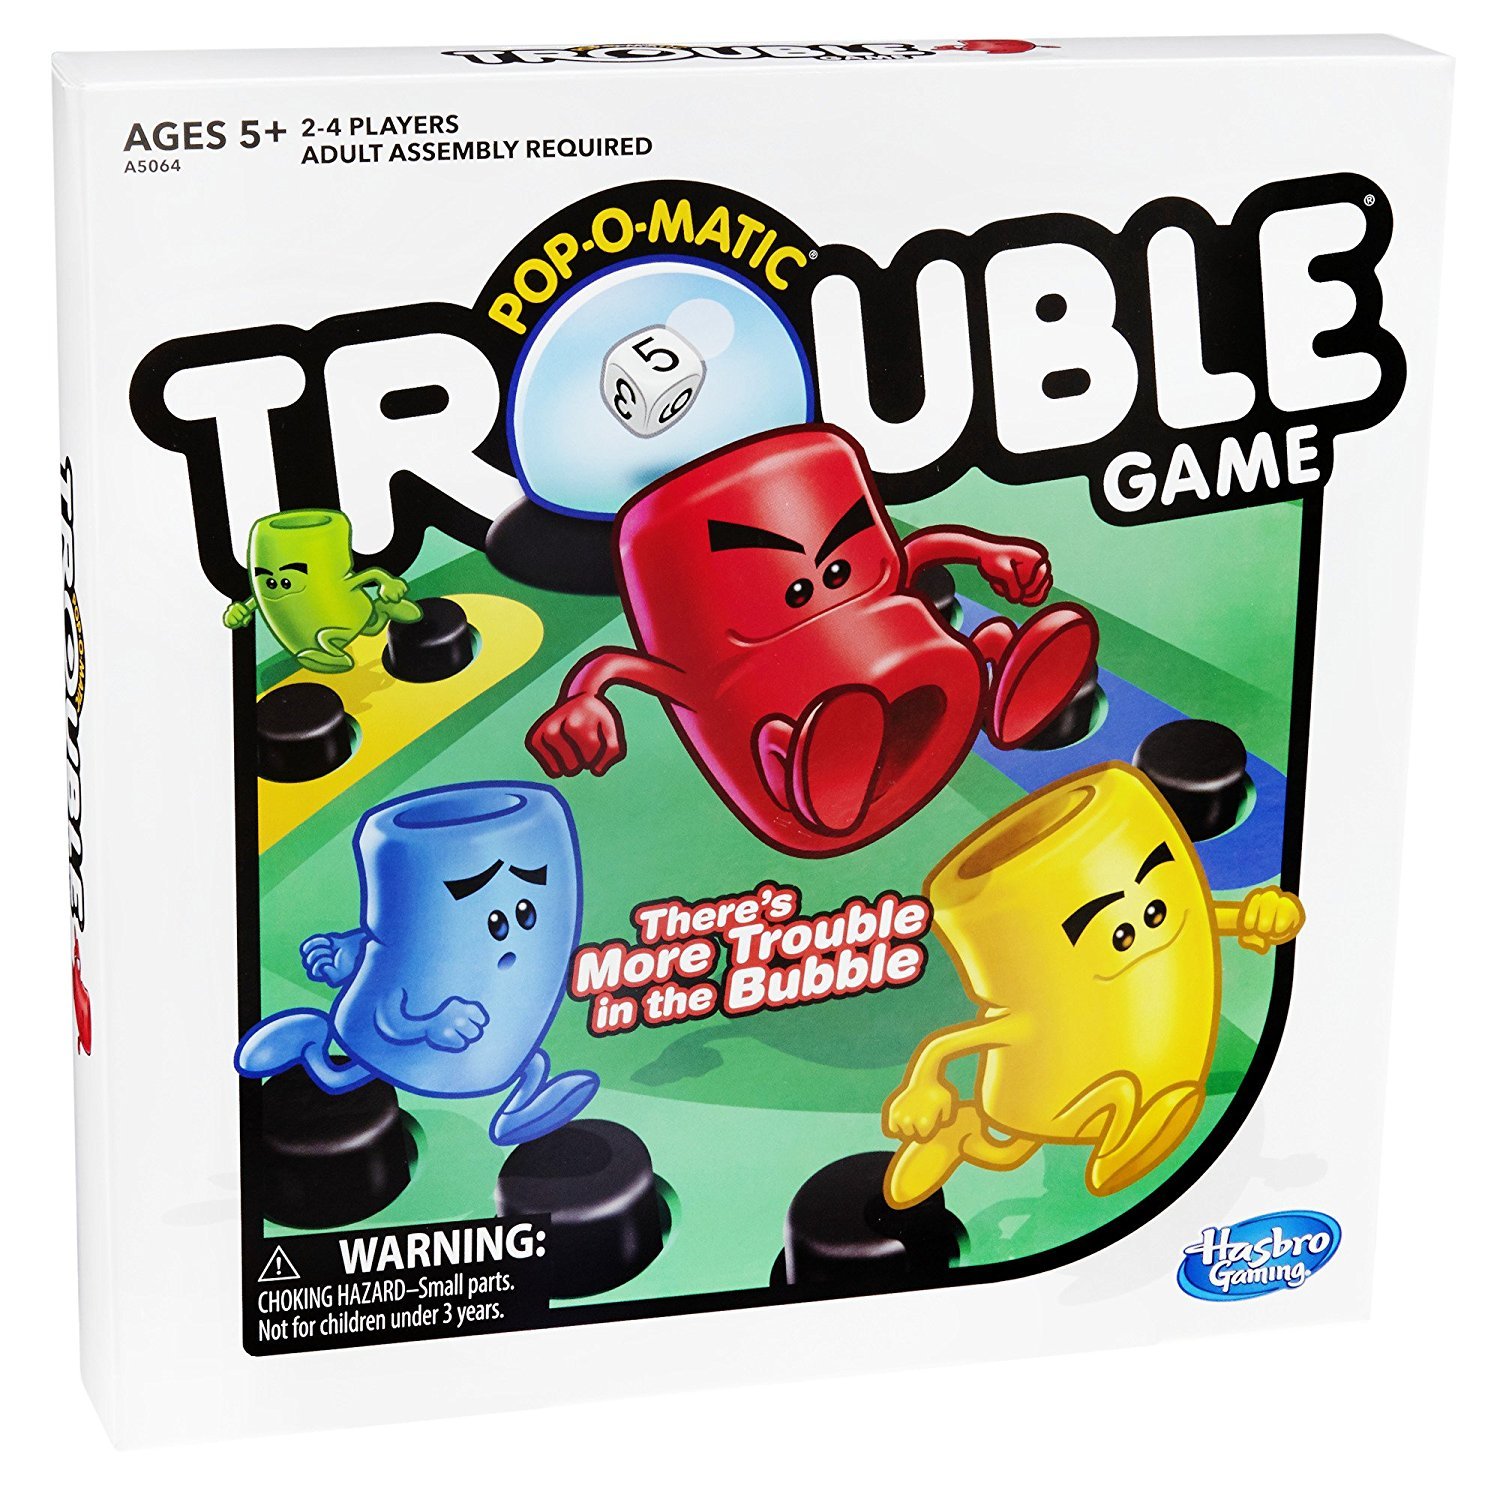 Hasbro Gaming Trouble Board Game Review